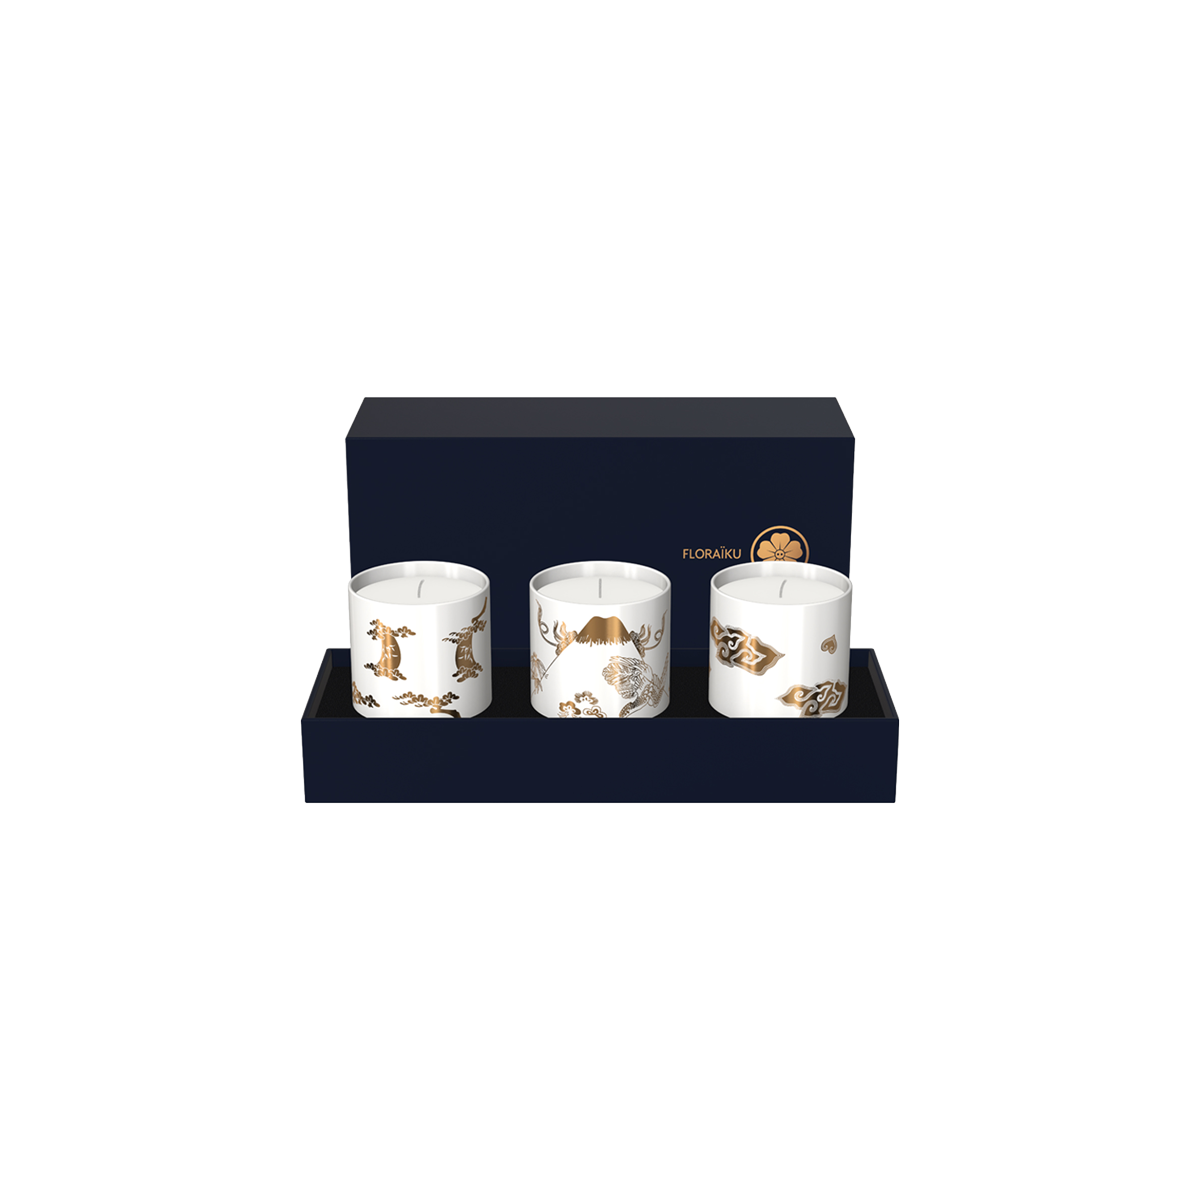 Floraïku - Enigmatic Flowers Gift Set of Scented Candles